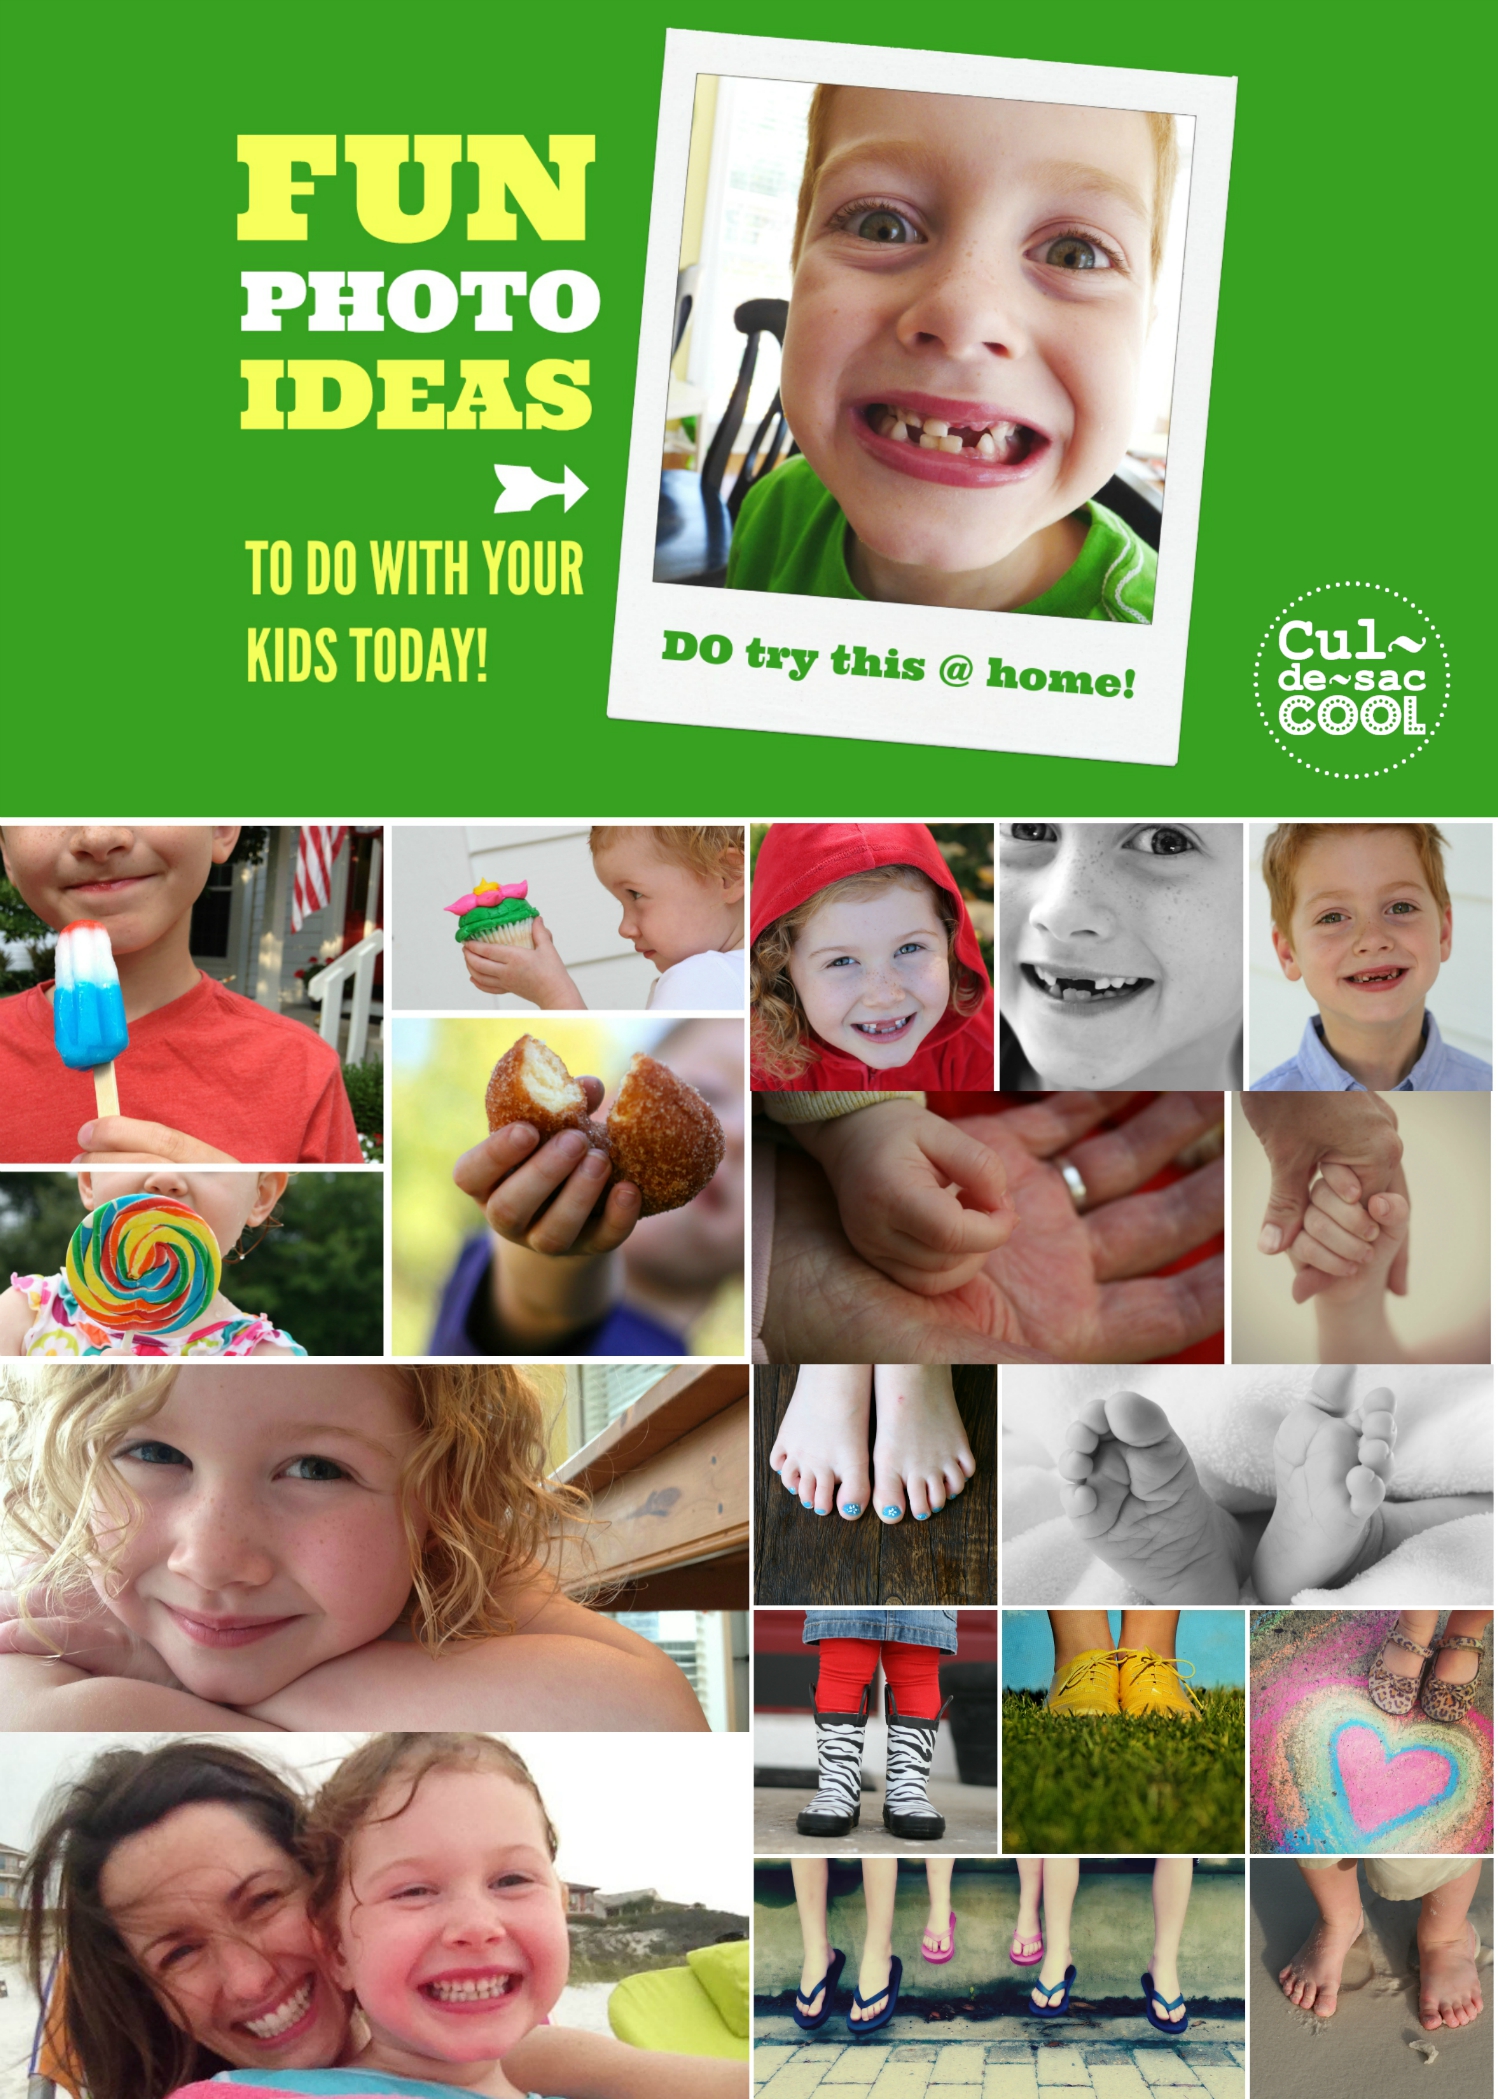 Fun Photo Ideas To Do With Your Kids Today Collage